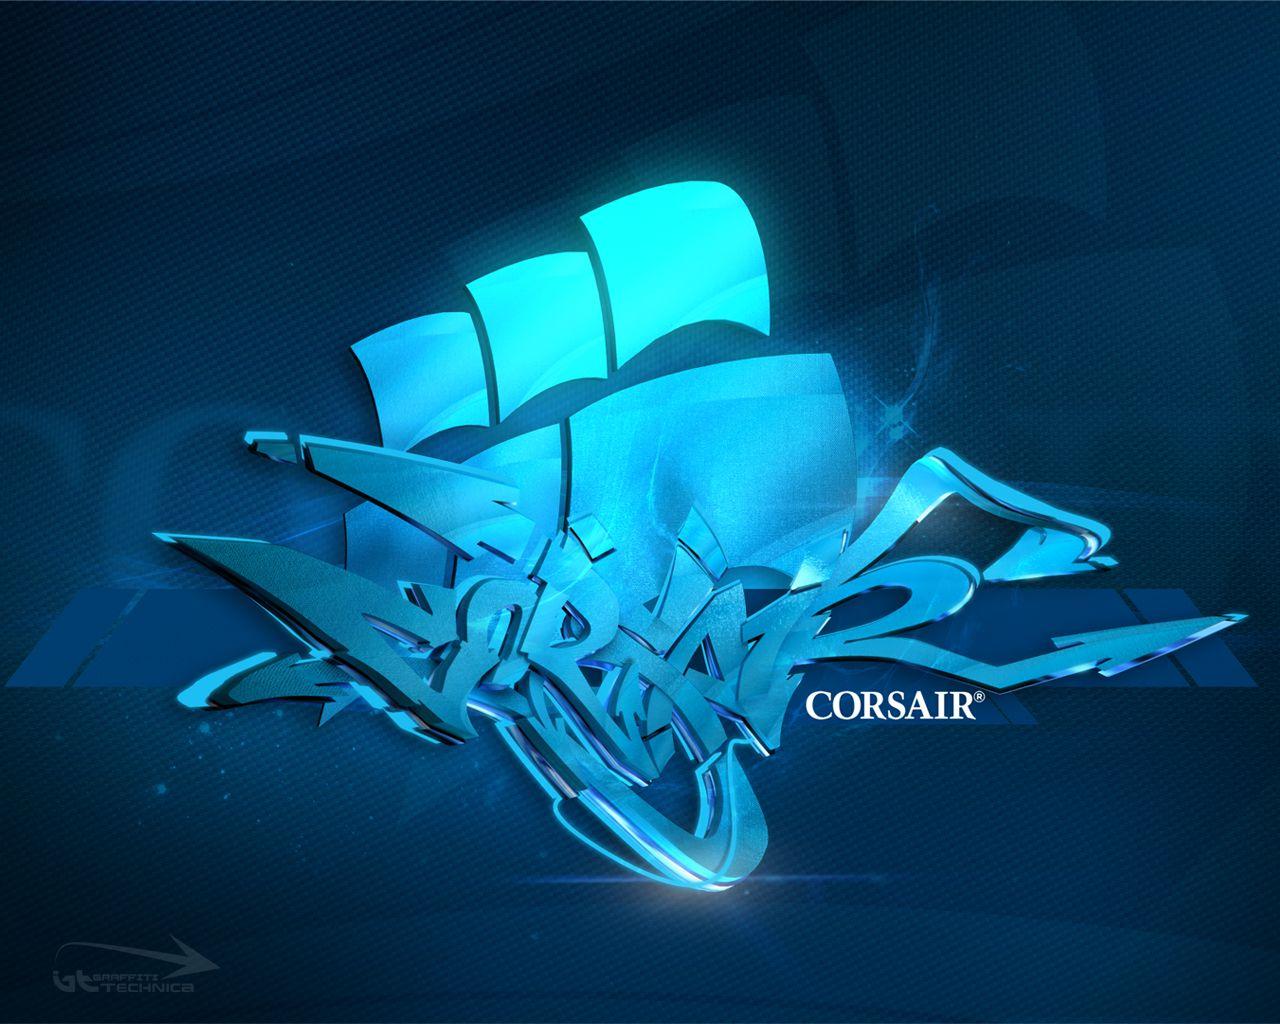 Corsair Wallpapers HD Backgrounds, Image, Pics, Photos Free